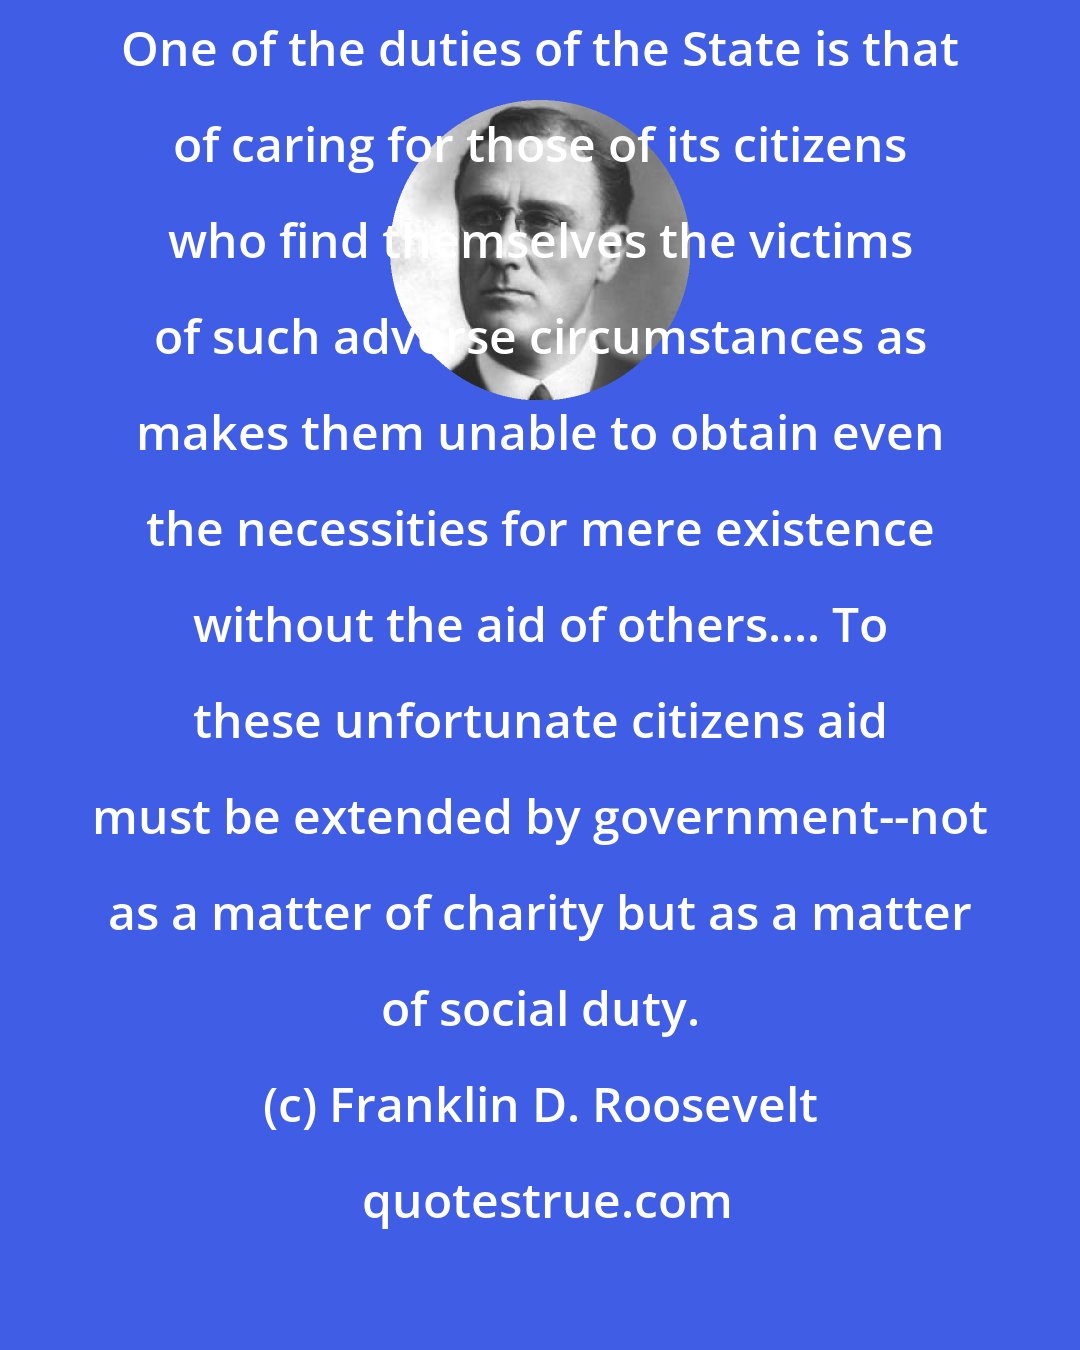 Franklin D. Roosevelt: The duty of the State toward the citizen is the duty of the servant to its master.... One of the duties of the State is that of caring for those of its citizens who find themselves the victims of such adverse circumstances as makes them unable to obtain even the necessities for mere existence without the aid of others.... To these unfortunate citizens aid must be extended by government--not as a matter of charity but as a matter of social duty.